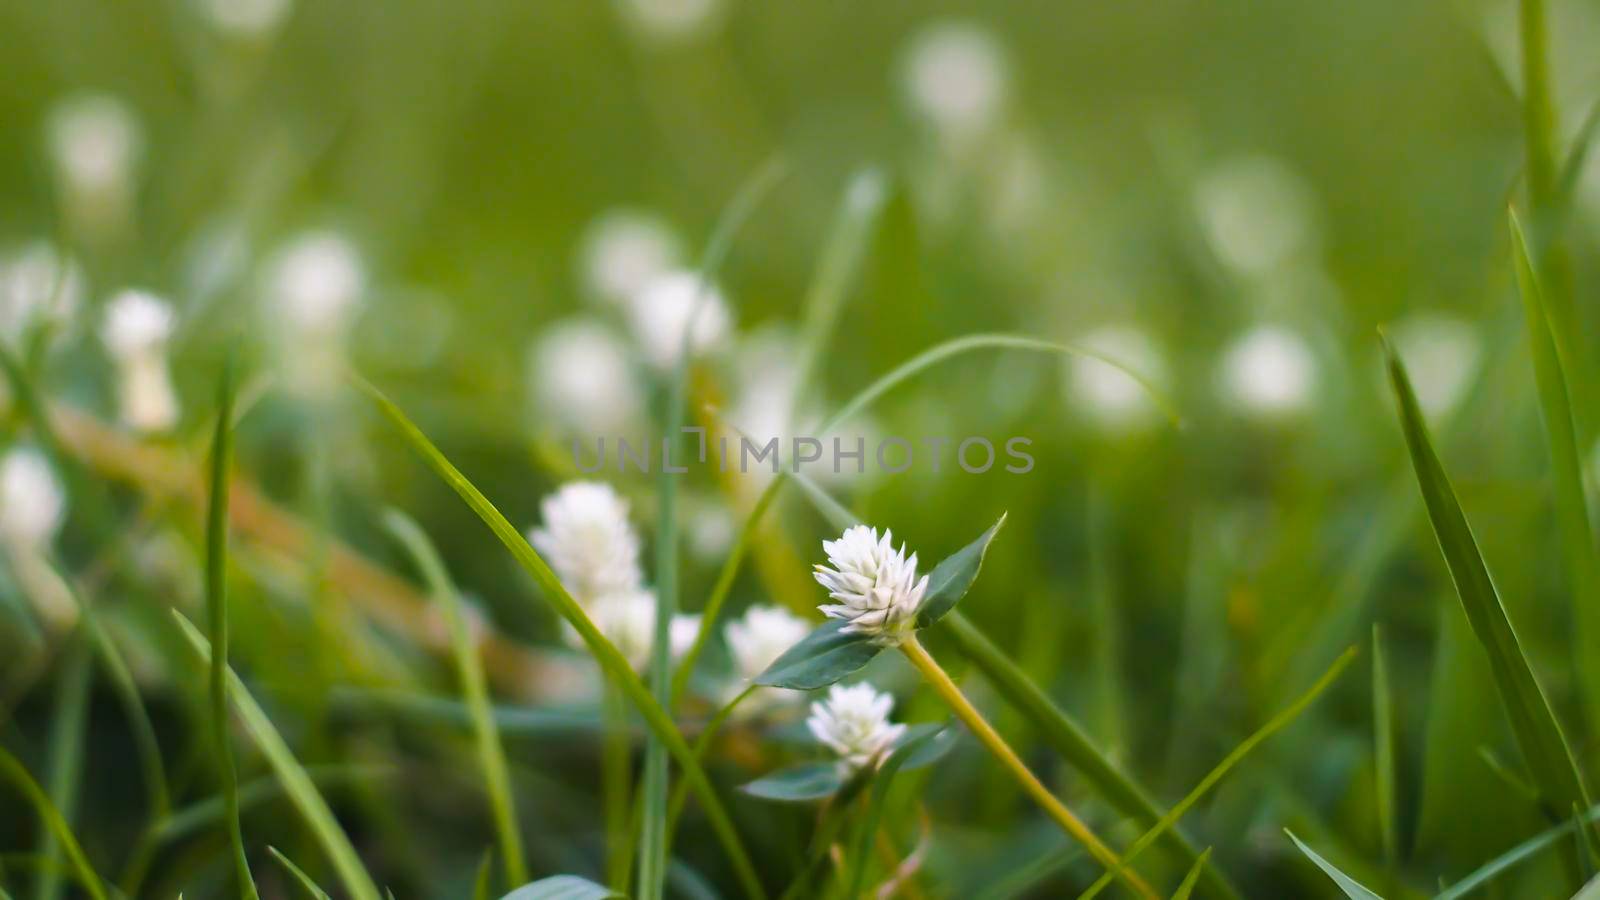 Grass pasture in grassland farming on beautiful sunny. Grass flowers with soft focus background.